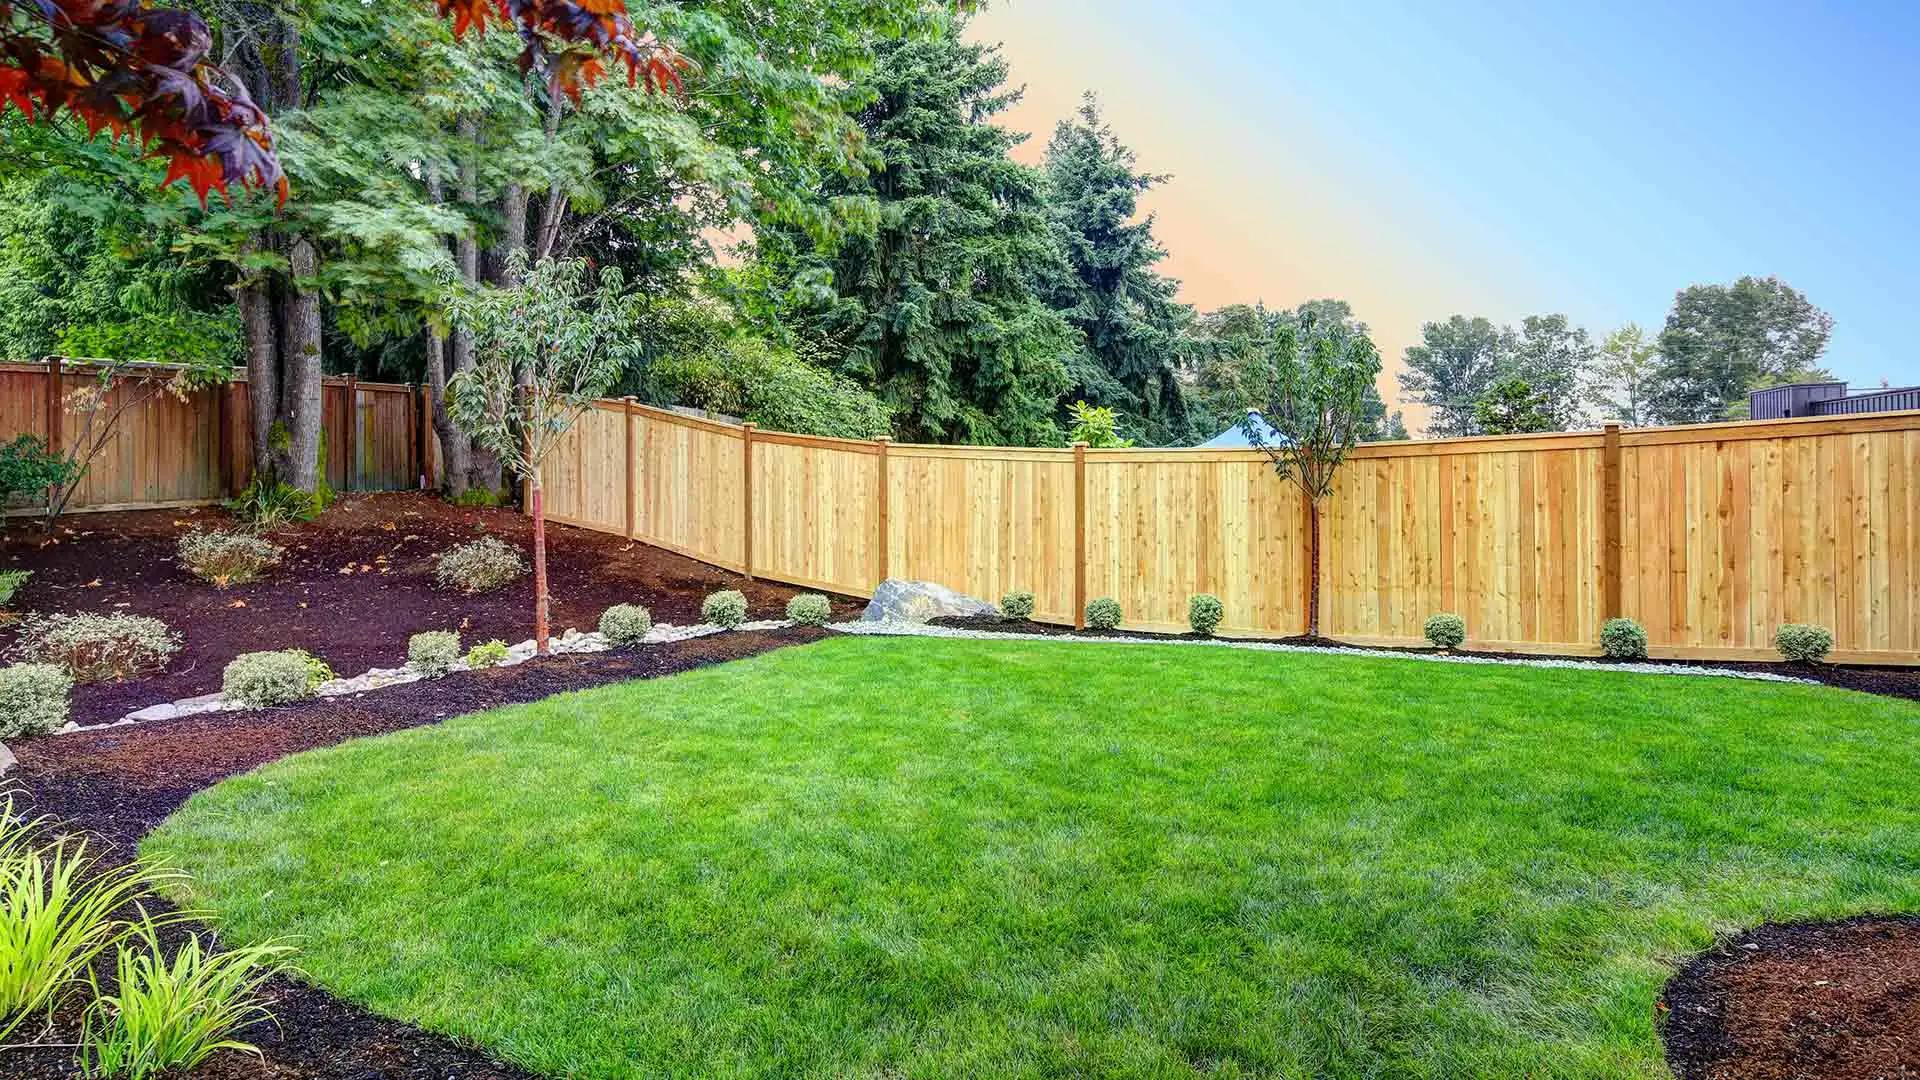 Lawn and landscaping in Sauk Rapids, MN that receives routine maintenance and care services.